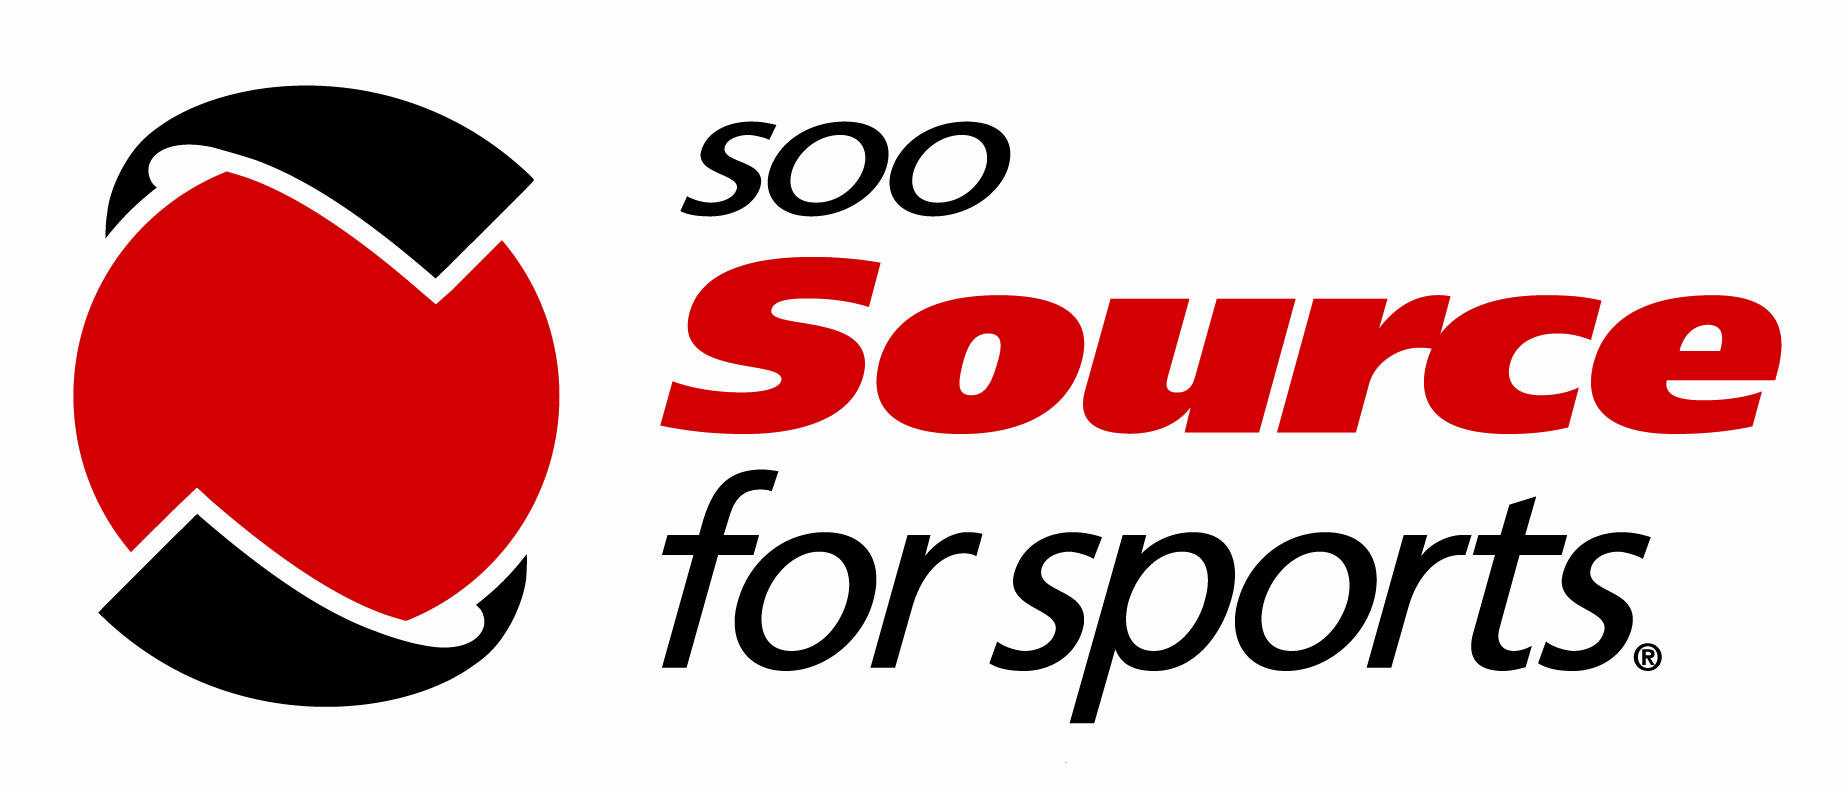 Soo Source for Sports